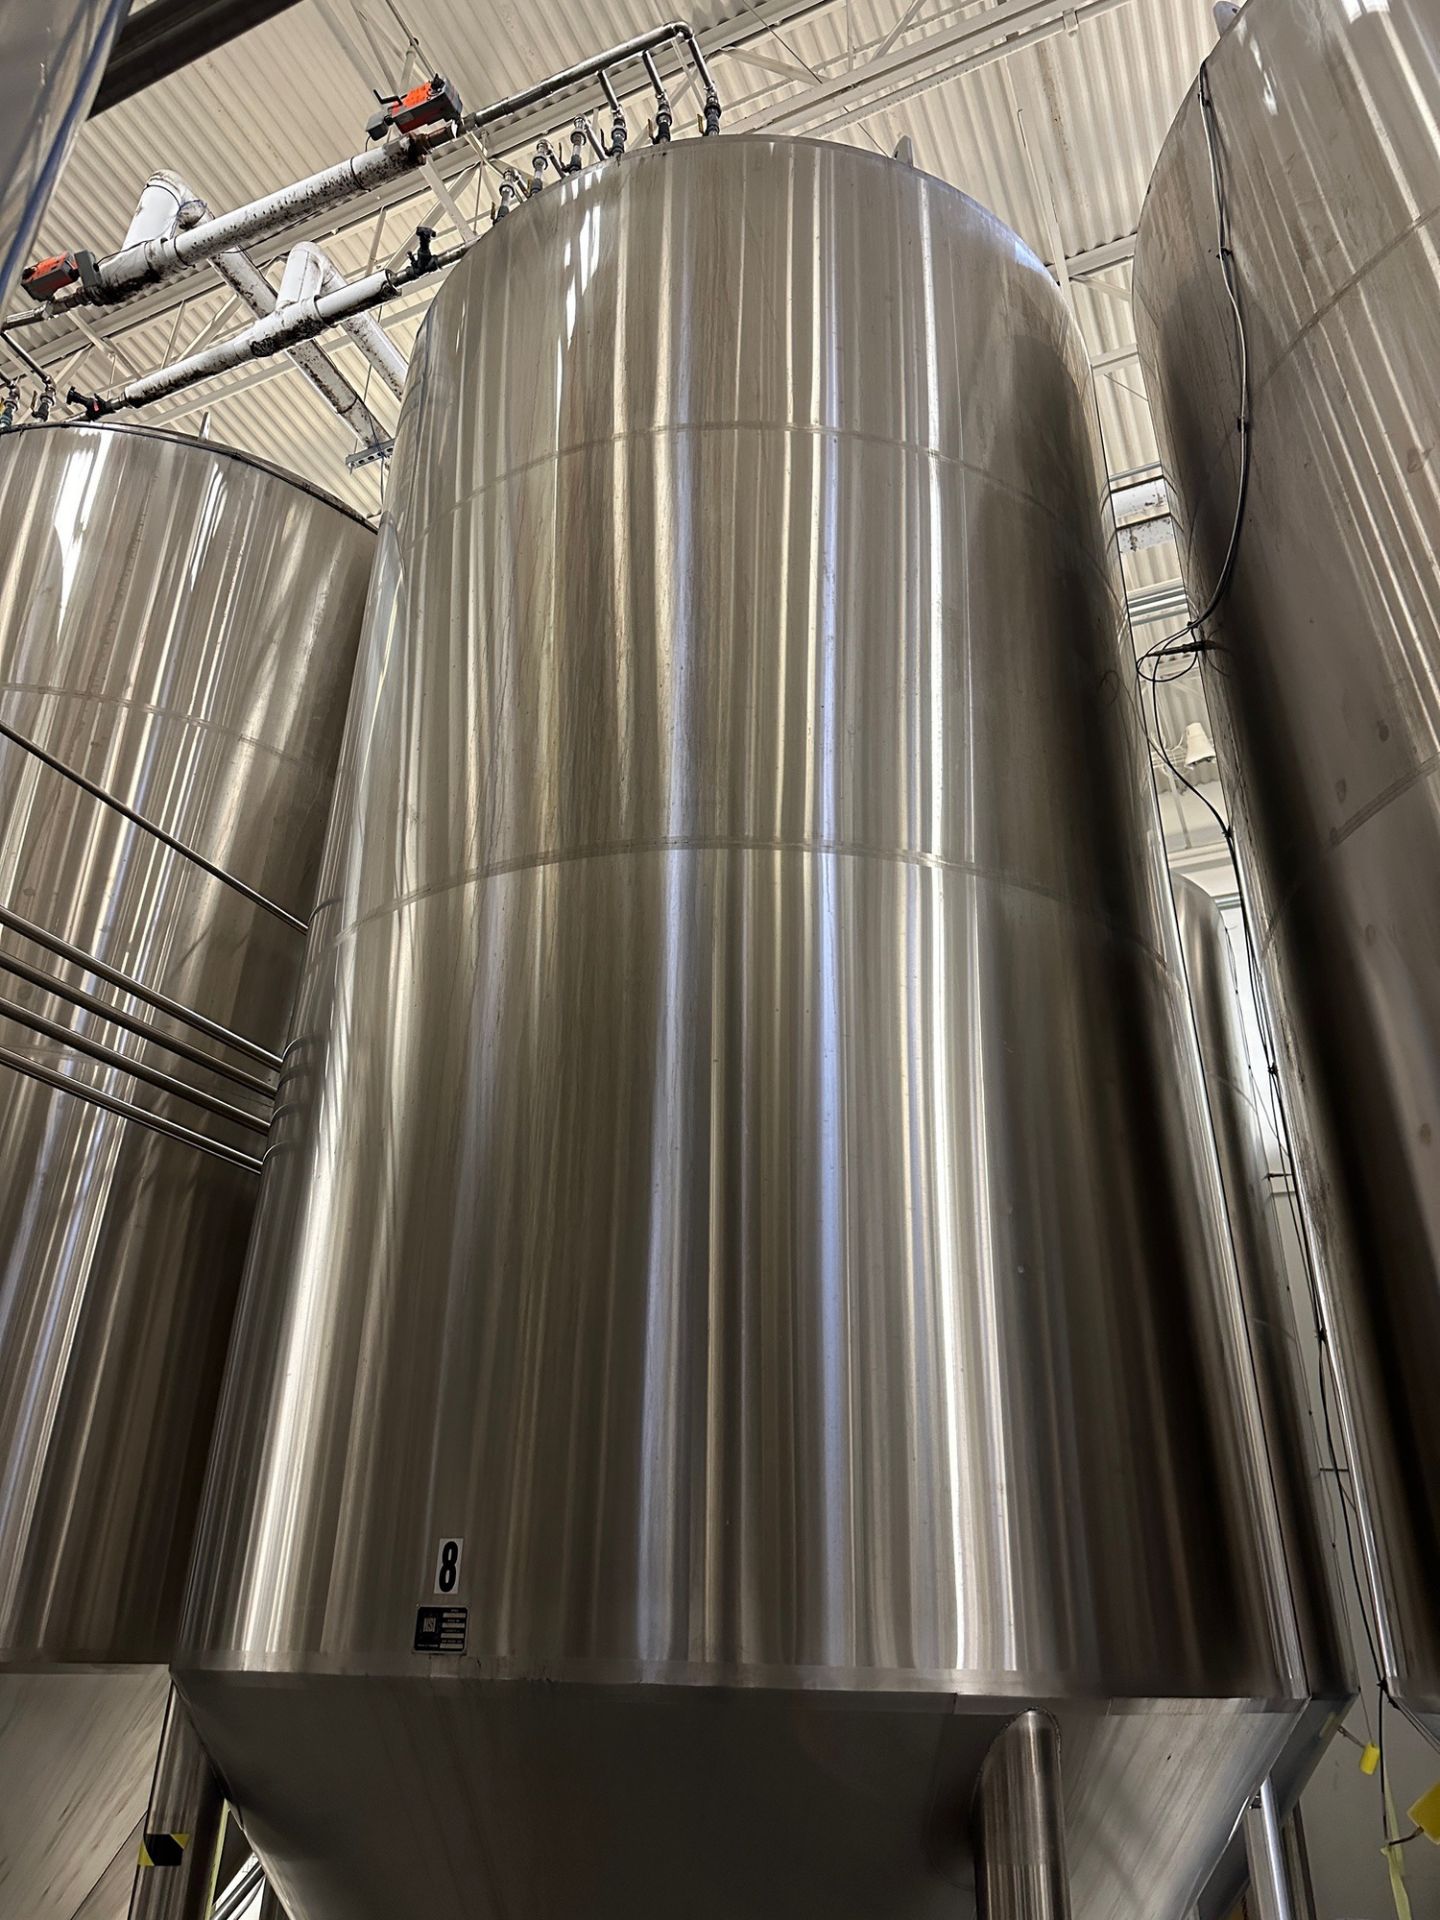 (1 of 6) 2016 NSI 132 BBL FV / 175 BBL or 5,400 Gal Max Capacity Stainless Steel Uni-Tank (8) , Cone - Image 3 of 4